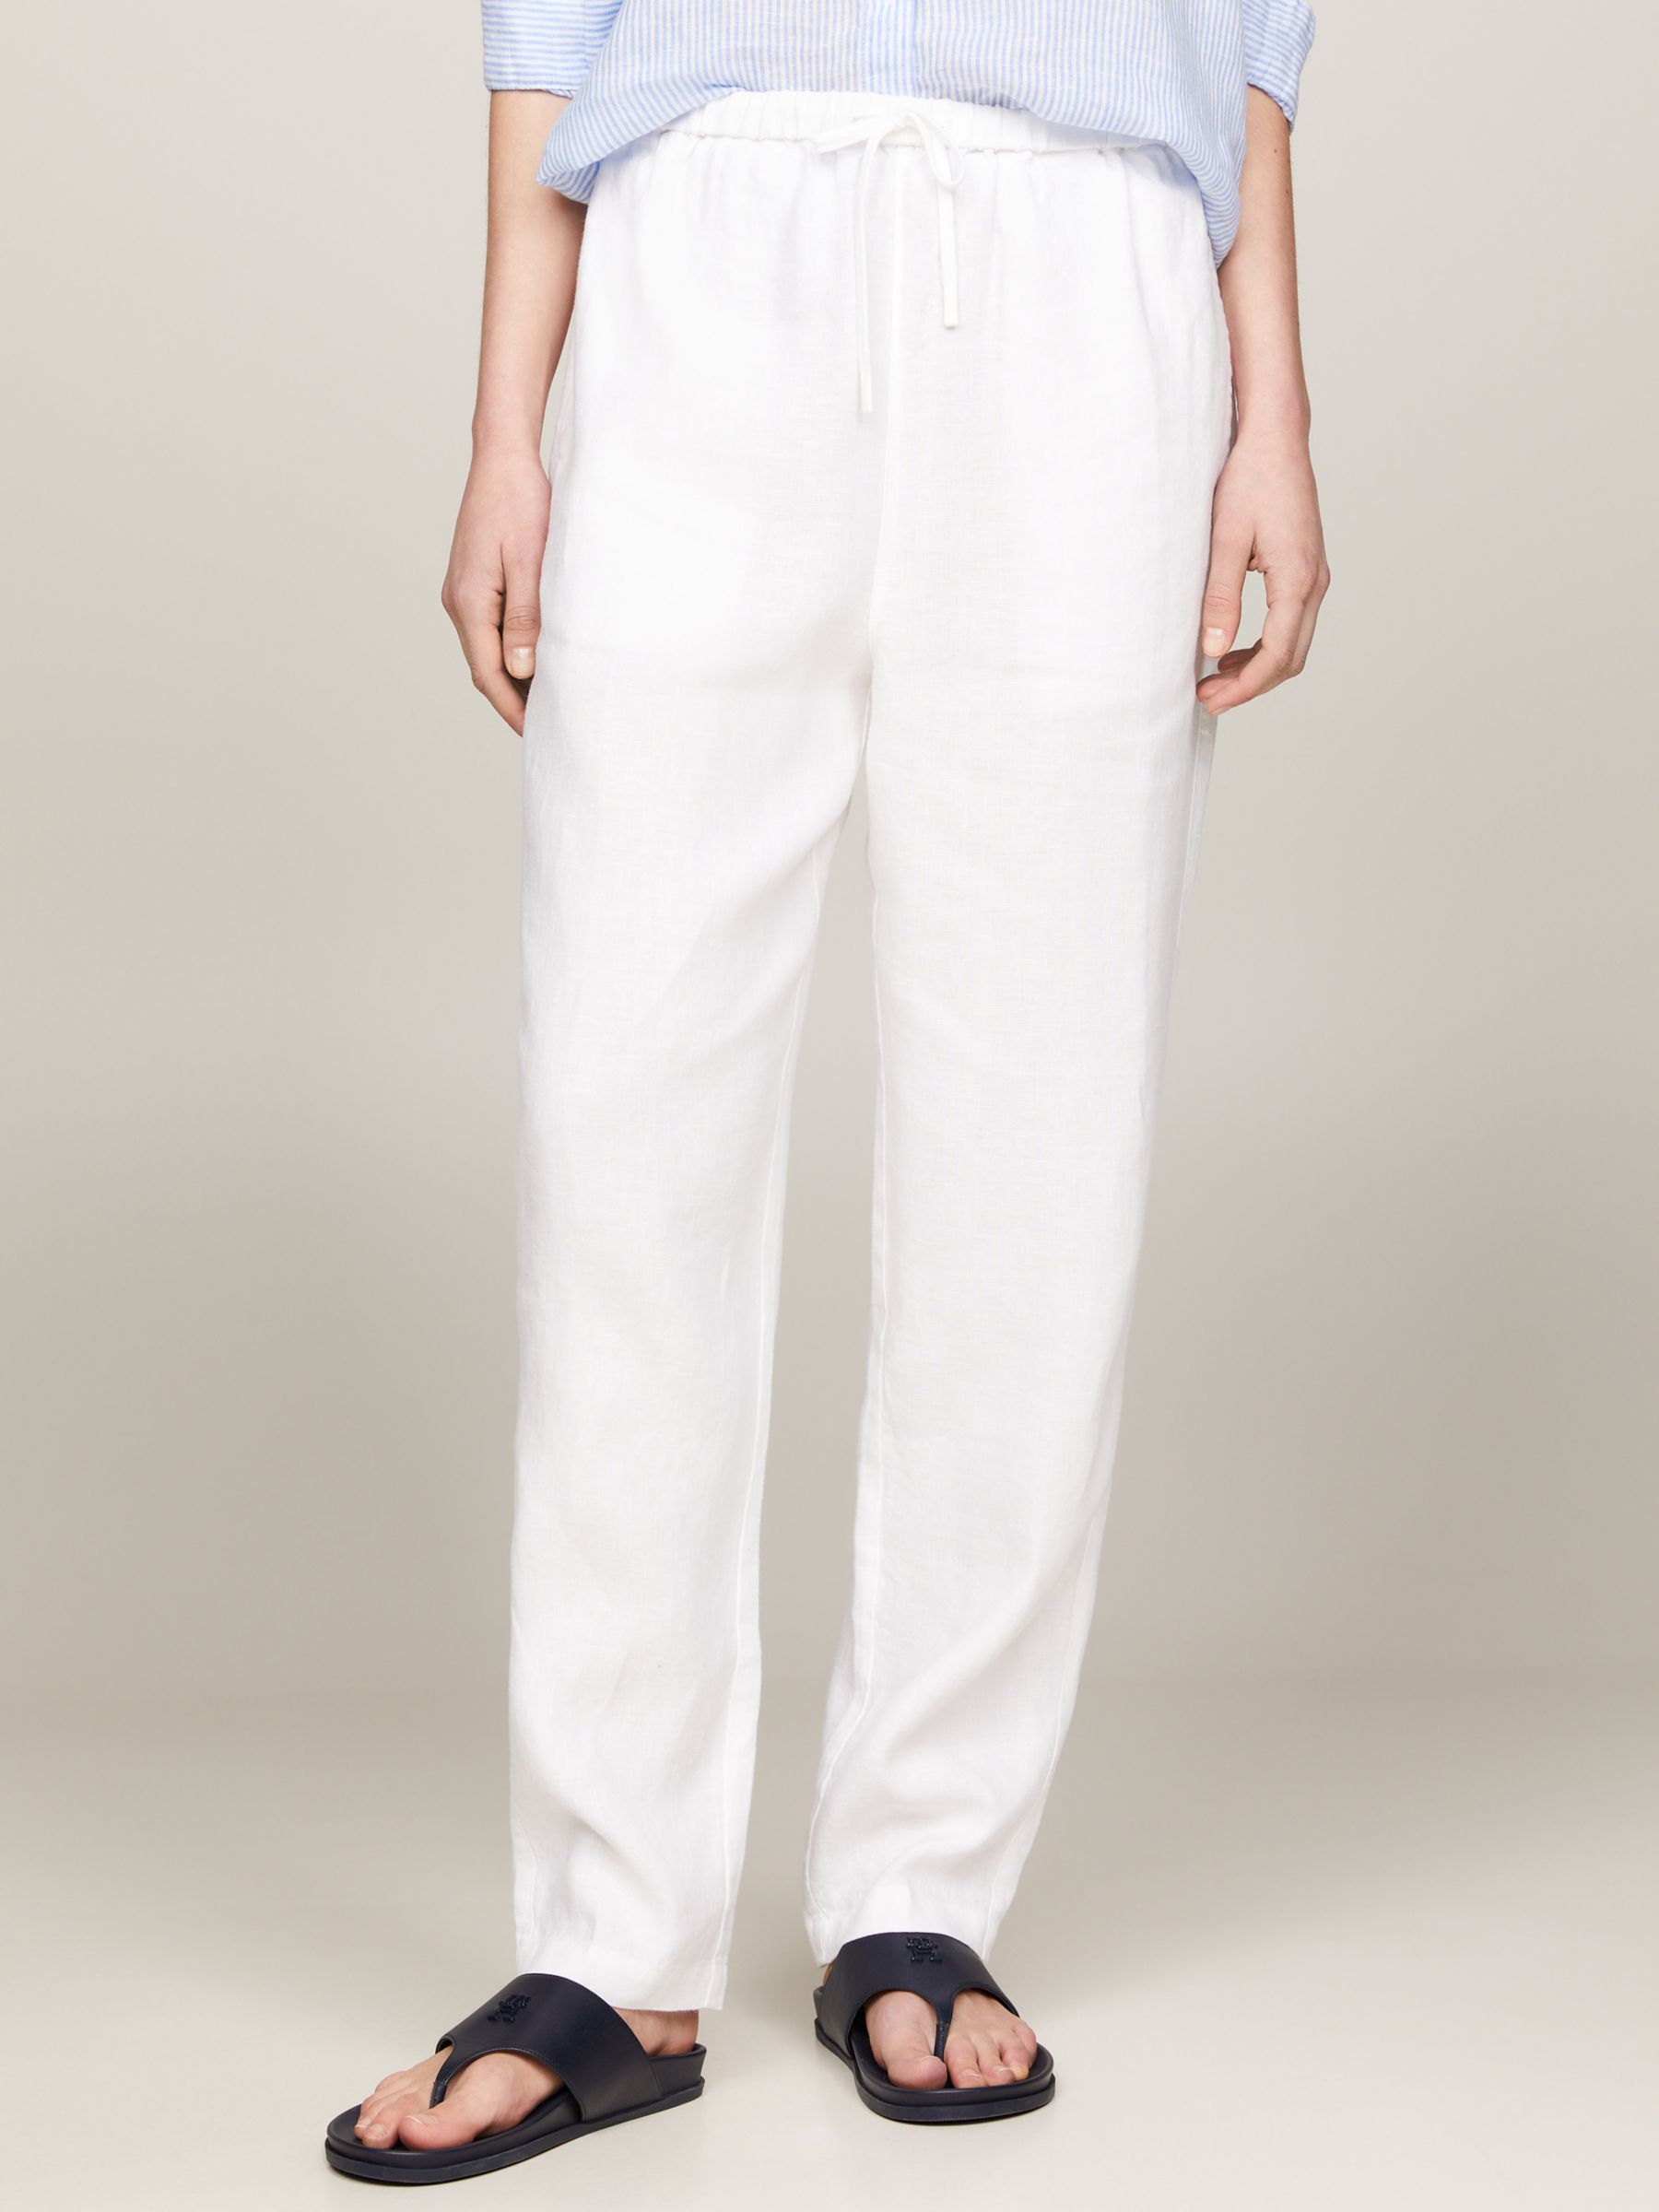 Tommy Hilfiger Linen Blend Drawstring Trousers, Optic White, 4